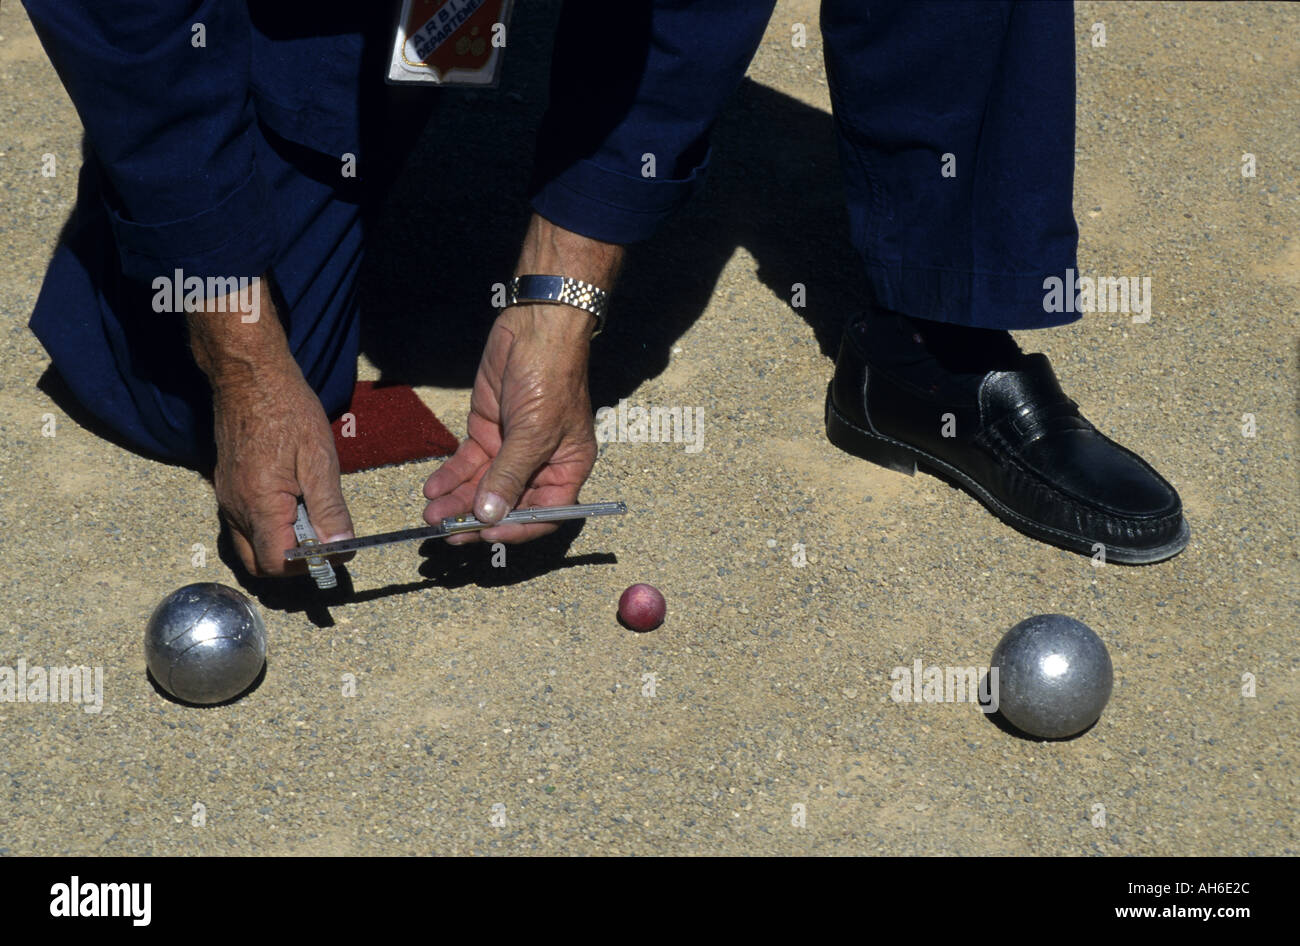 Player Of The French Boules Game Measuring Distance Between Two Boule, Provence, France Stock Photo